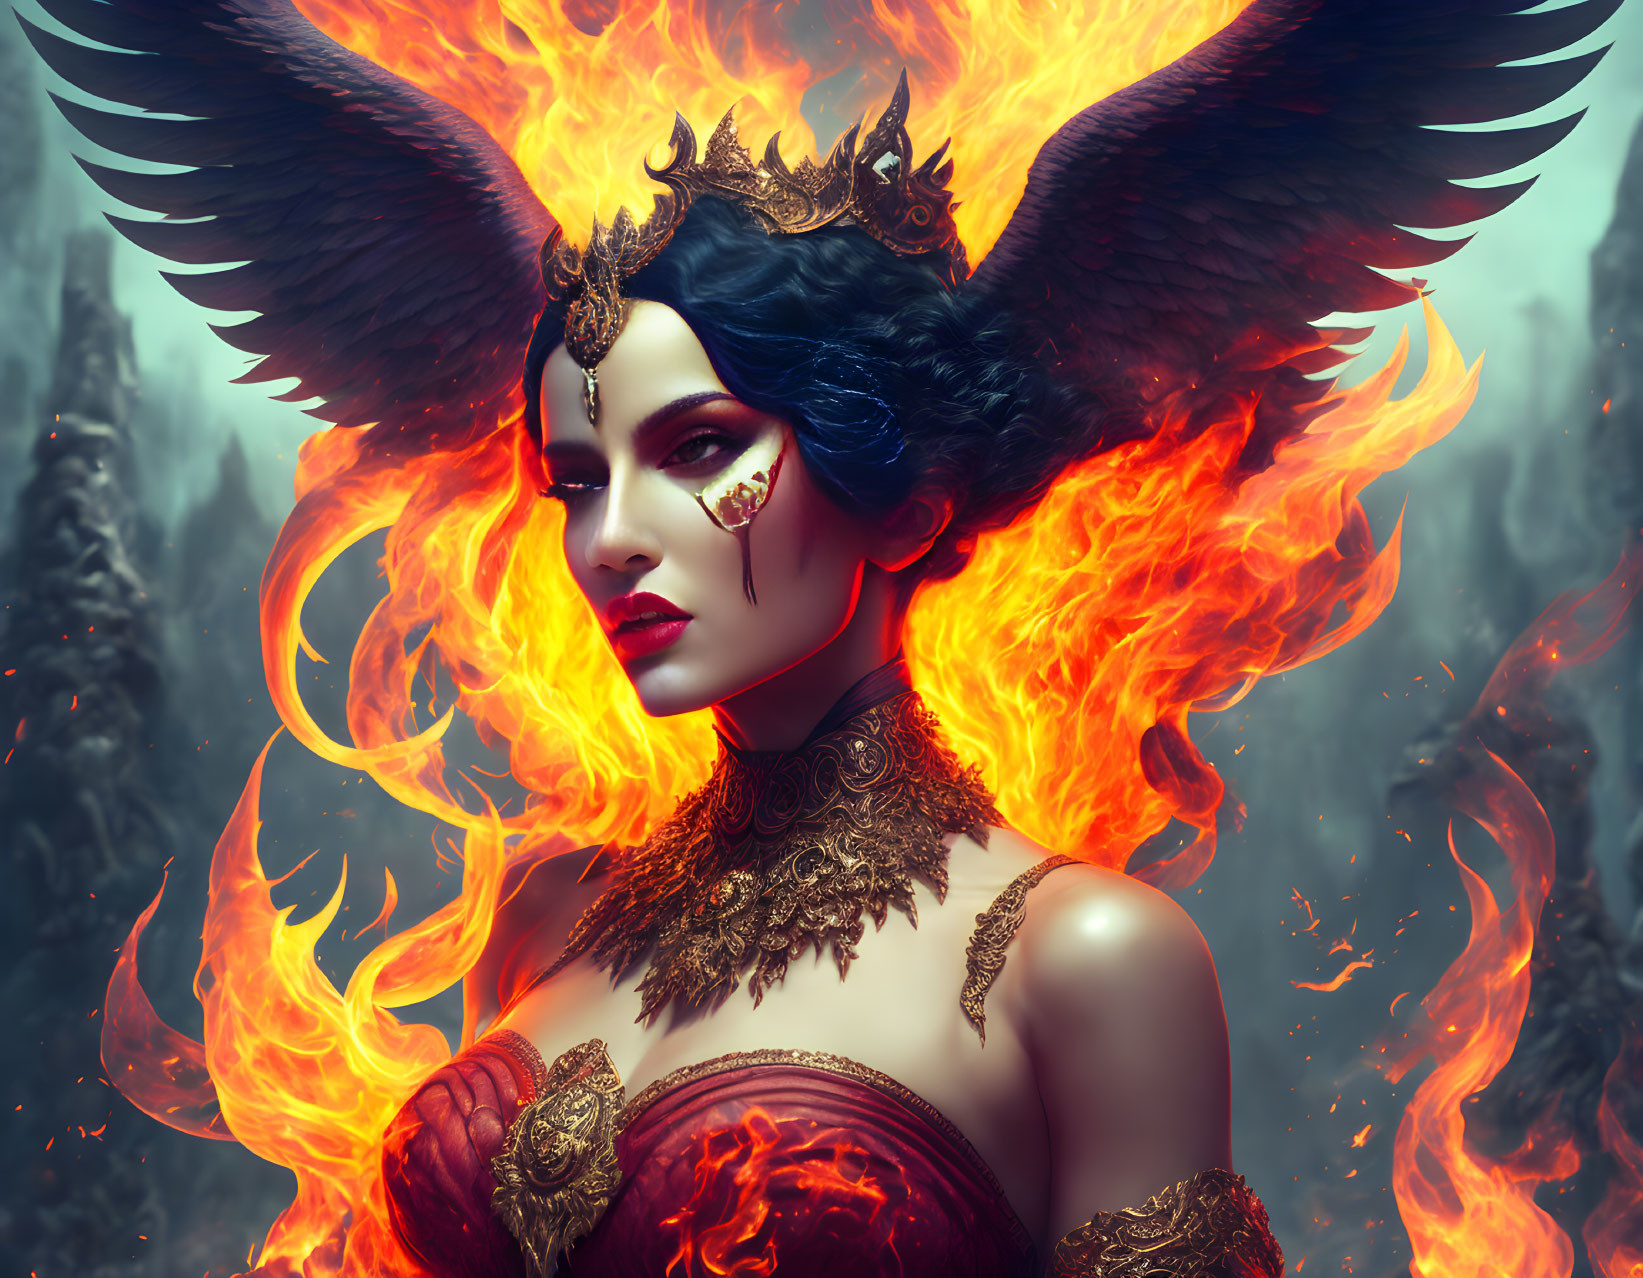 Dark-haired figure in crown and wings amidst flames in misty forest